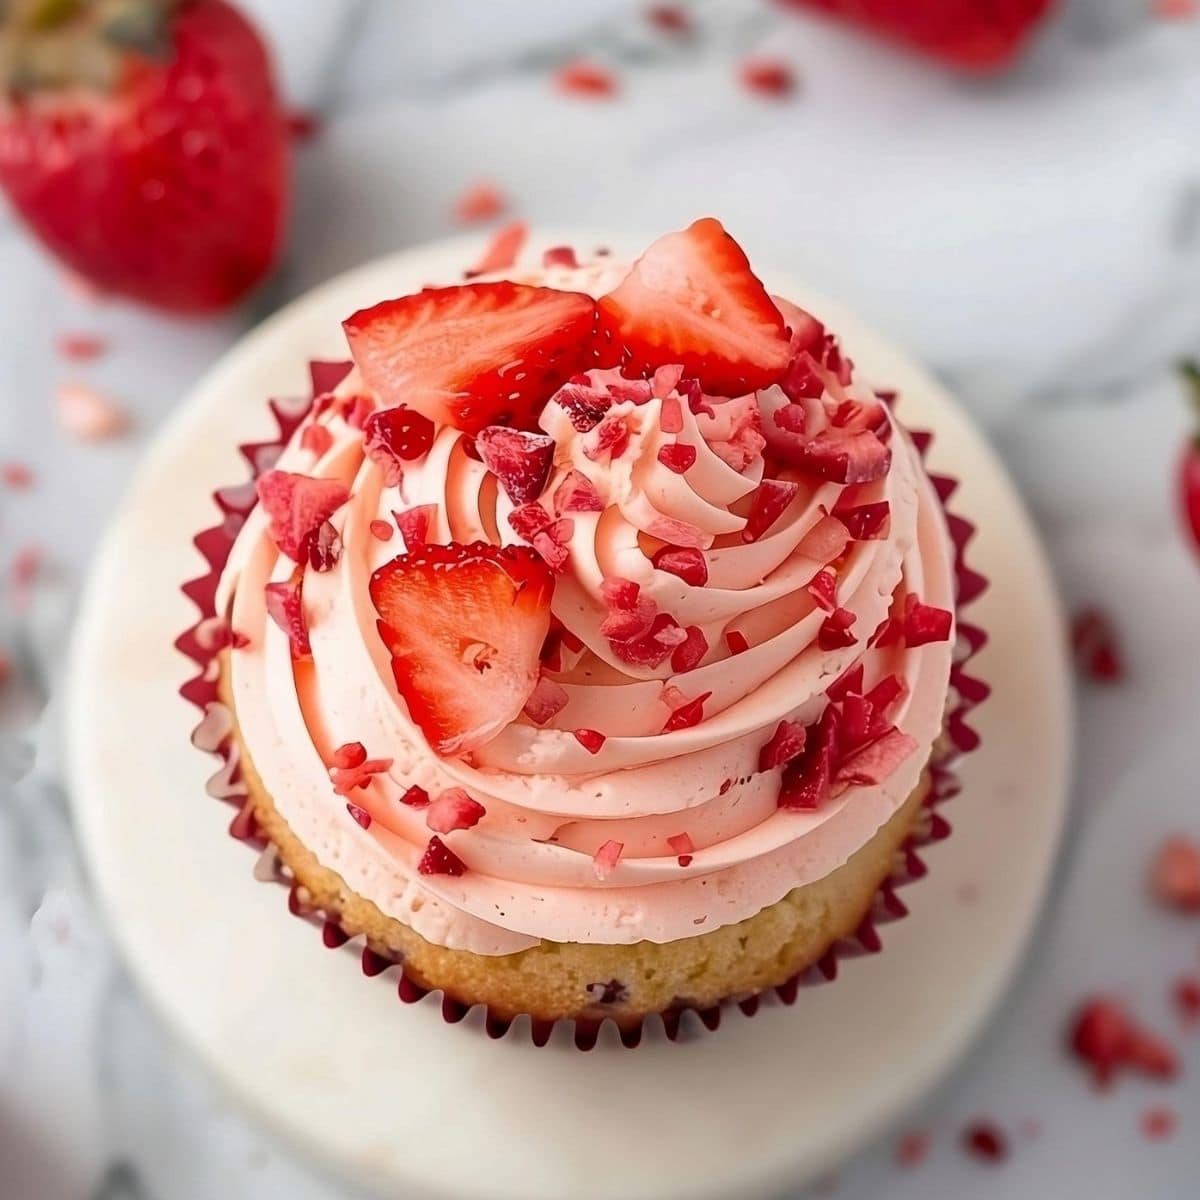 Top view of strawberry cupcake with strawberry slices and bits garnish.